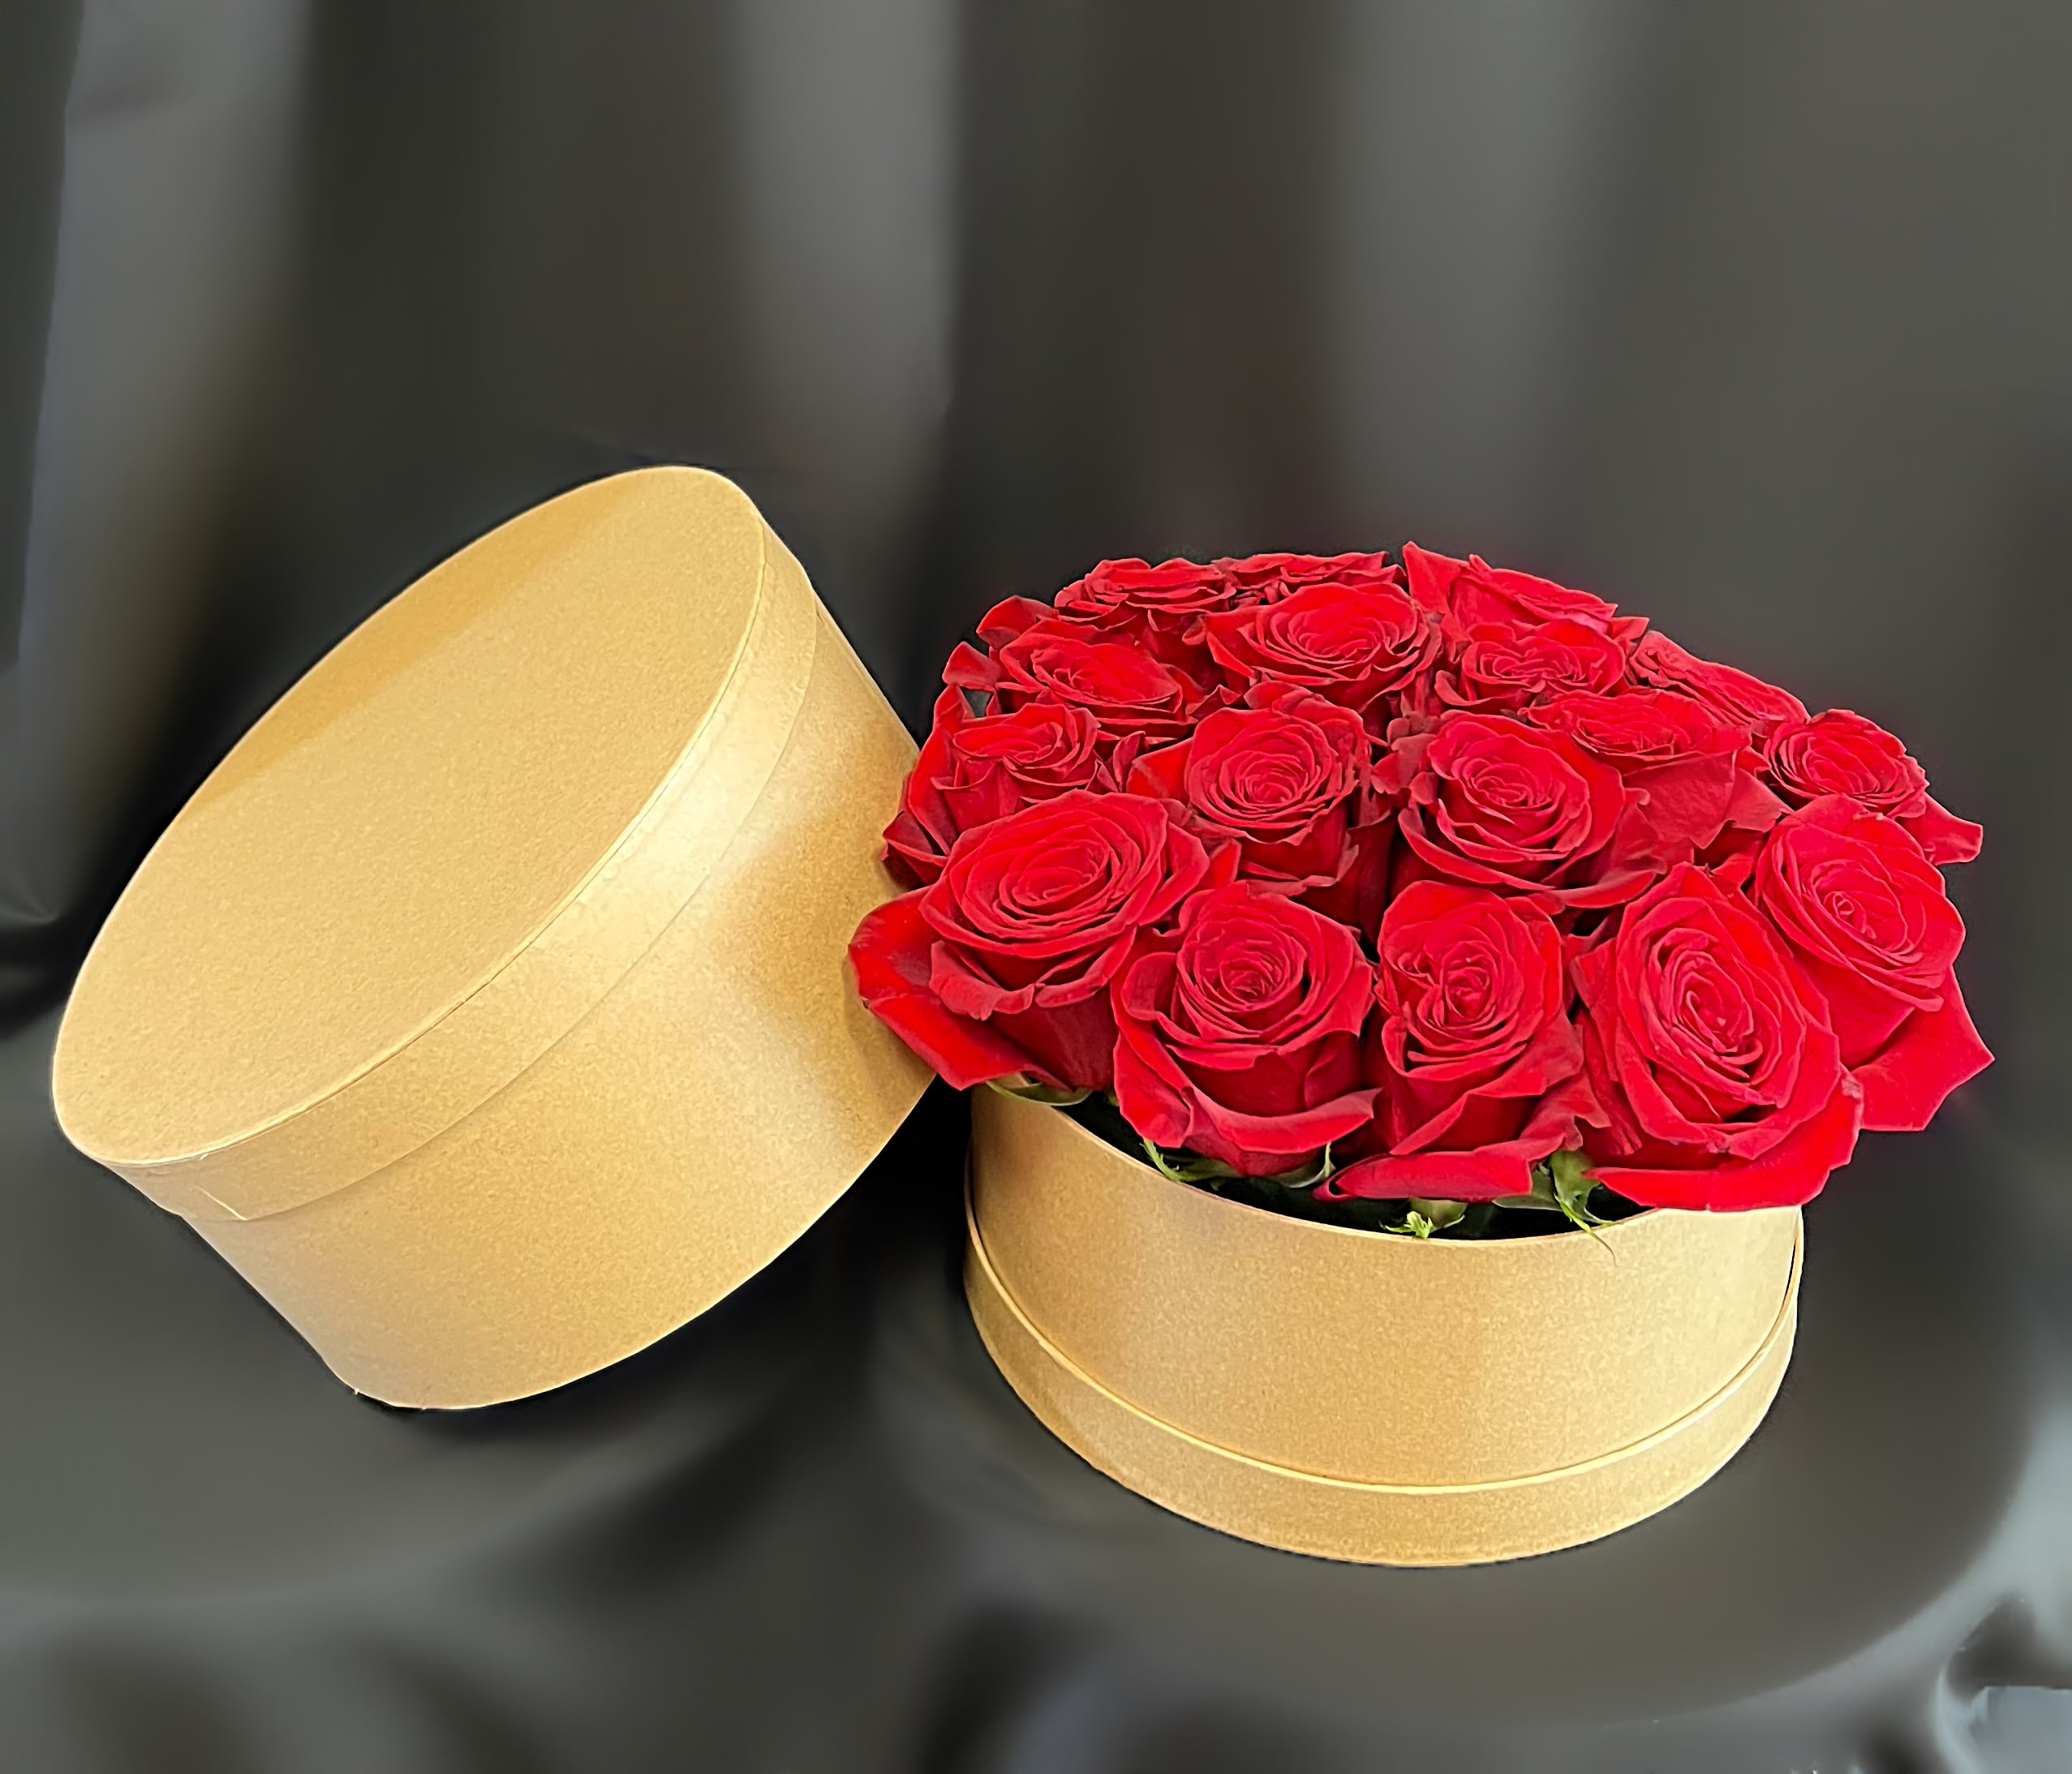 ROSES IN A ROUND BOX - 18 RED ROSES IN A ROUND BOX IF YOU WOULD LIKE A  DIFFERENT COLOR ROSE PLEASE CALL US TO SEE IF THE COLOR IS AVAILABLE.